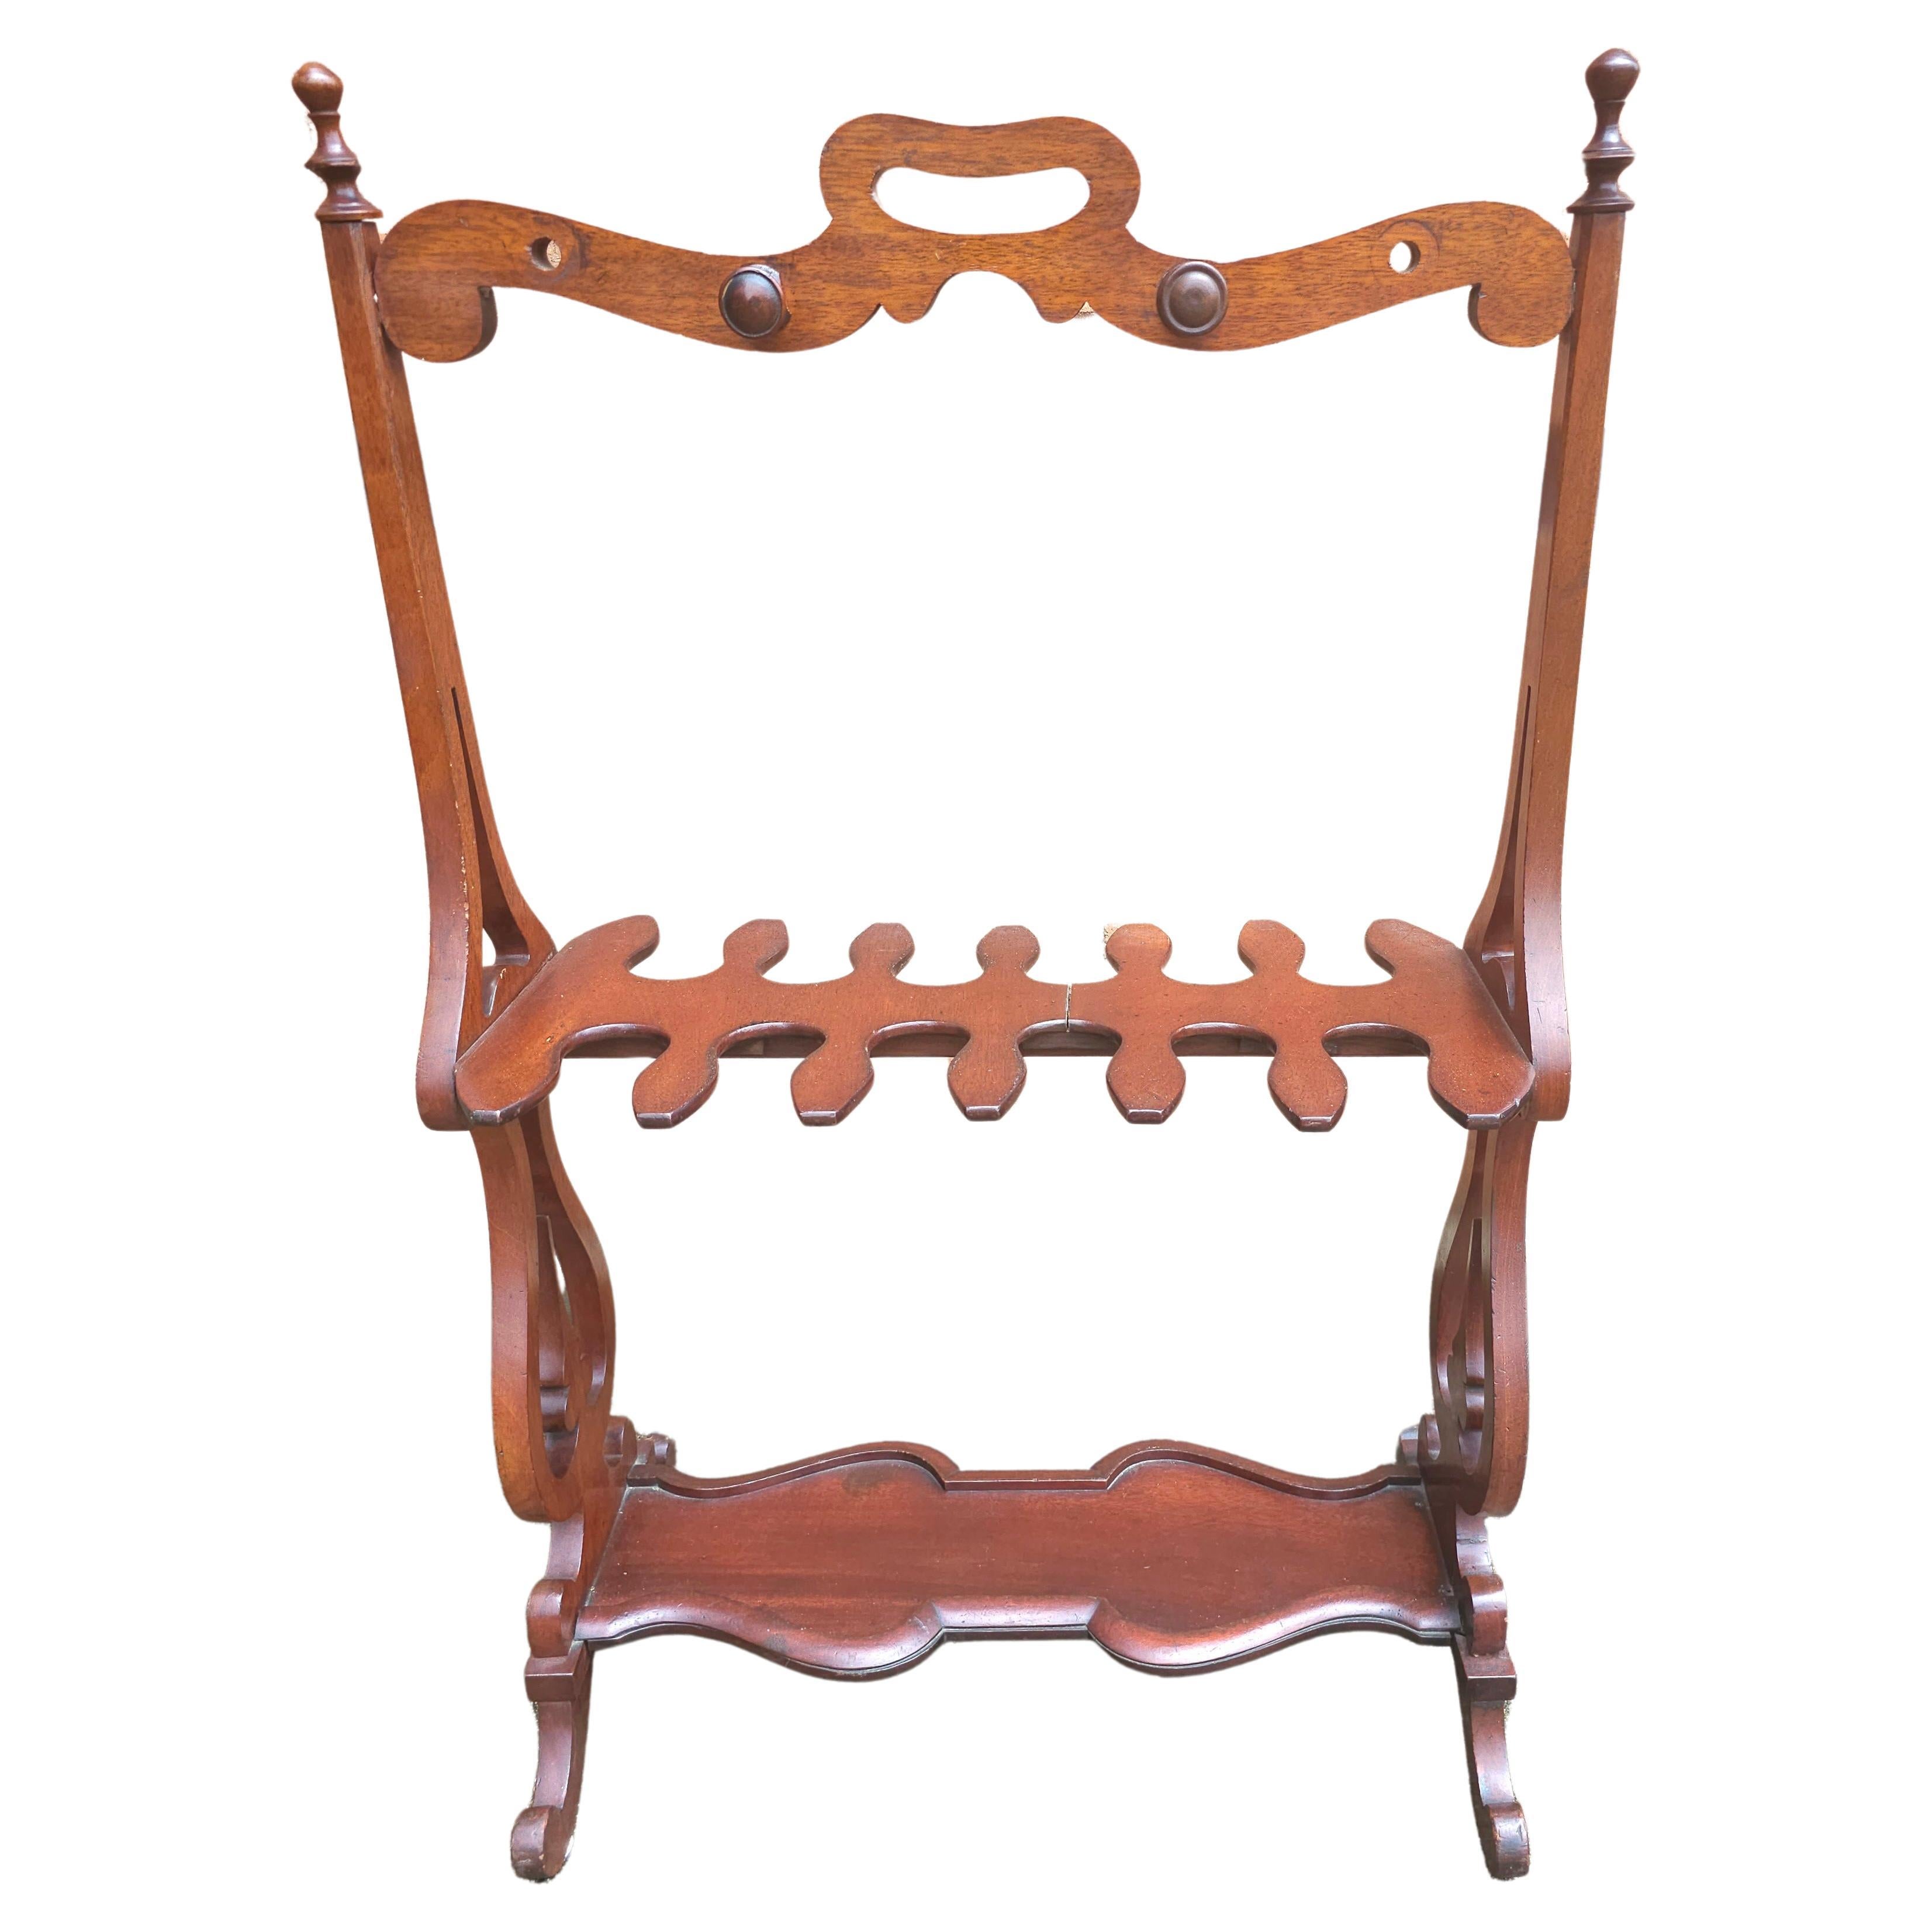 An Early American Style Mahogany Riding Boot Rack in good vintage condition.
Measures 25